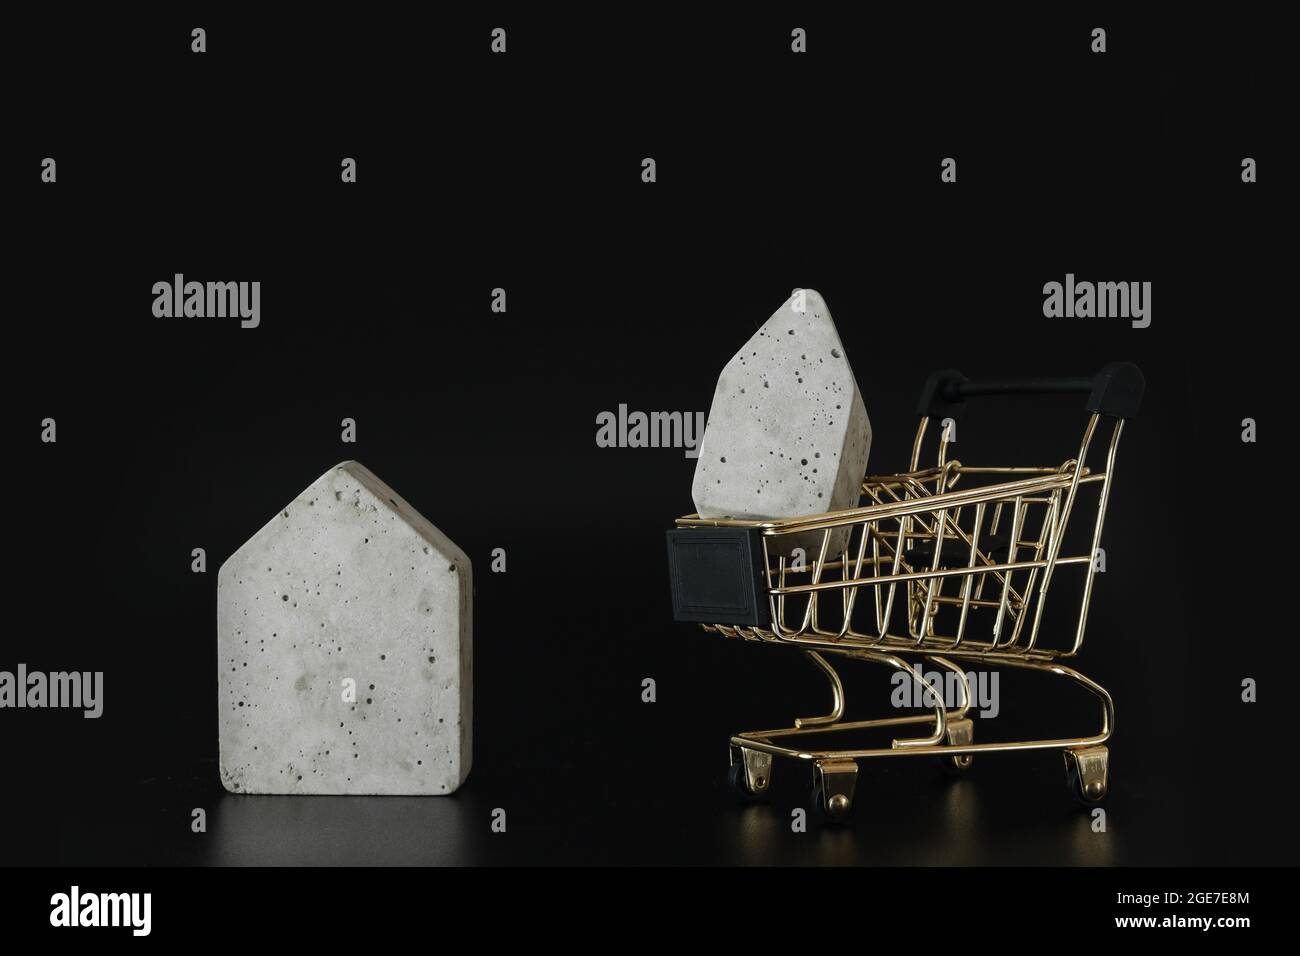 Buy or rent, choice. House model in mini shopping cart on the black background. Buy a house. Concept for property ladder, mortgage and real estate inv Stock Photo